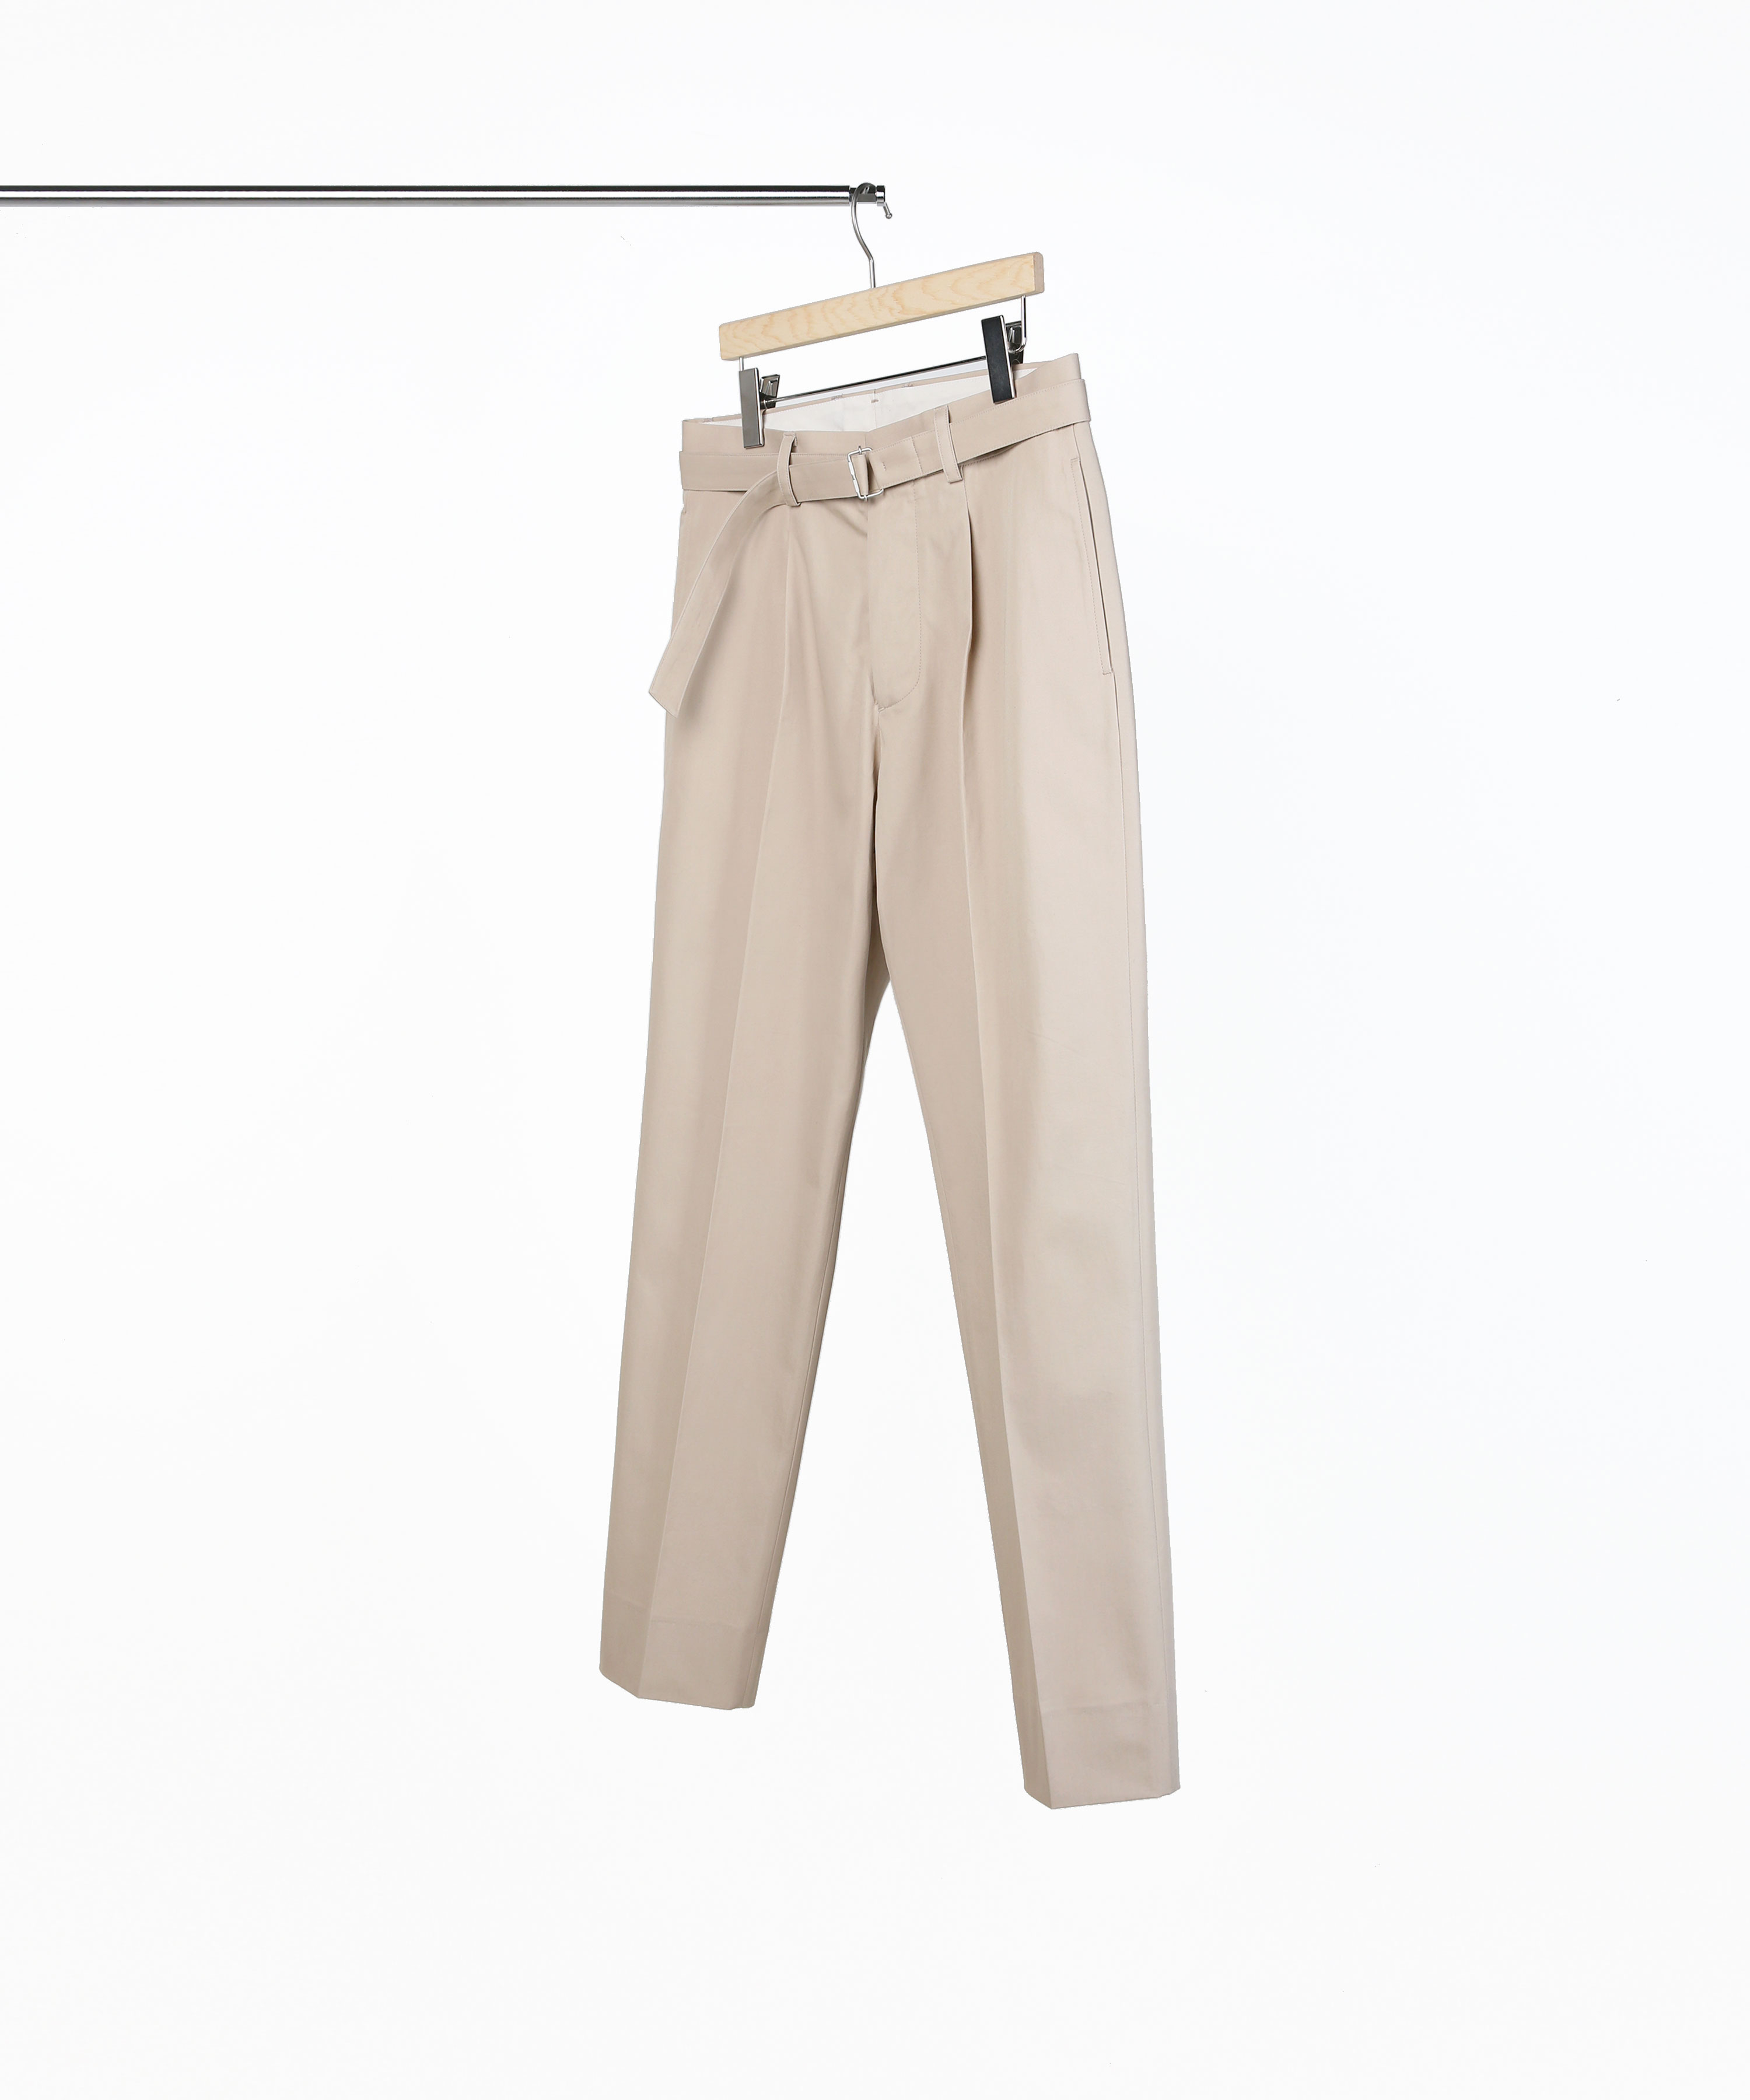 BEIGE COTTON BELTED PANTS 03-2